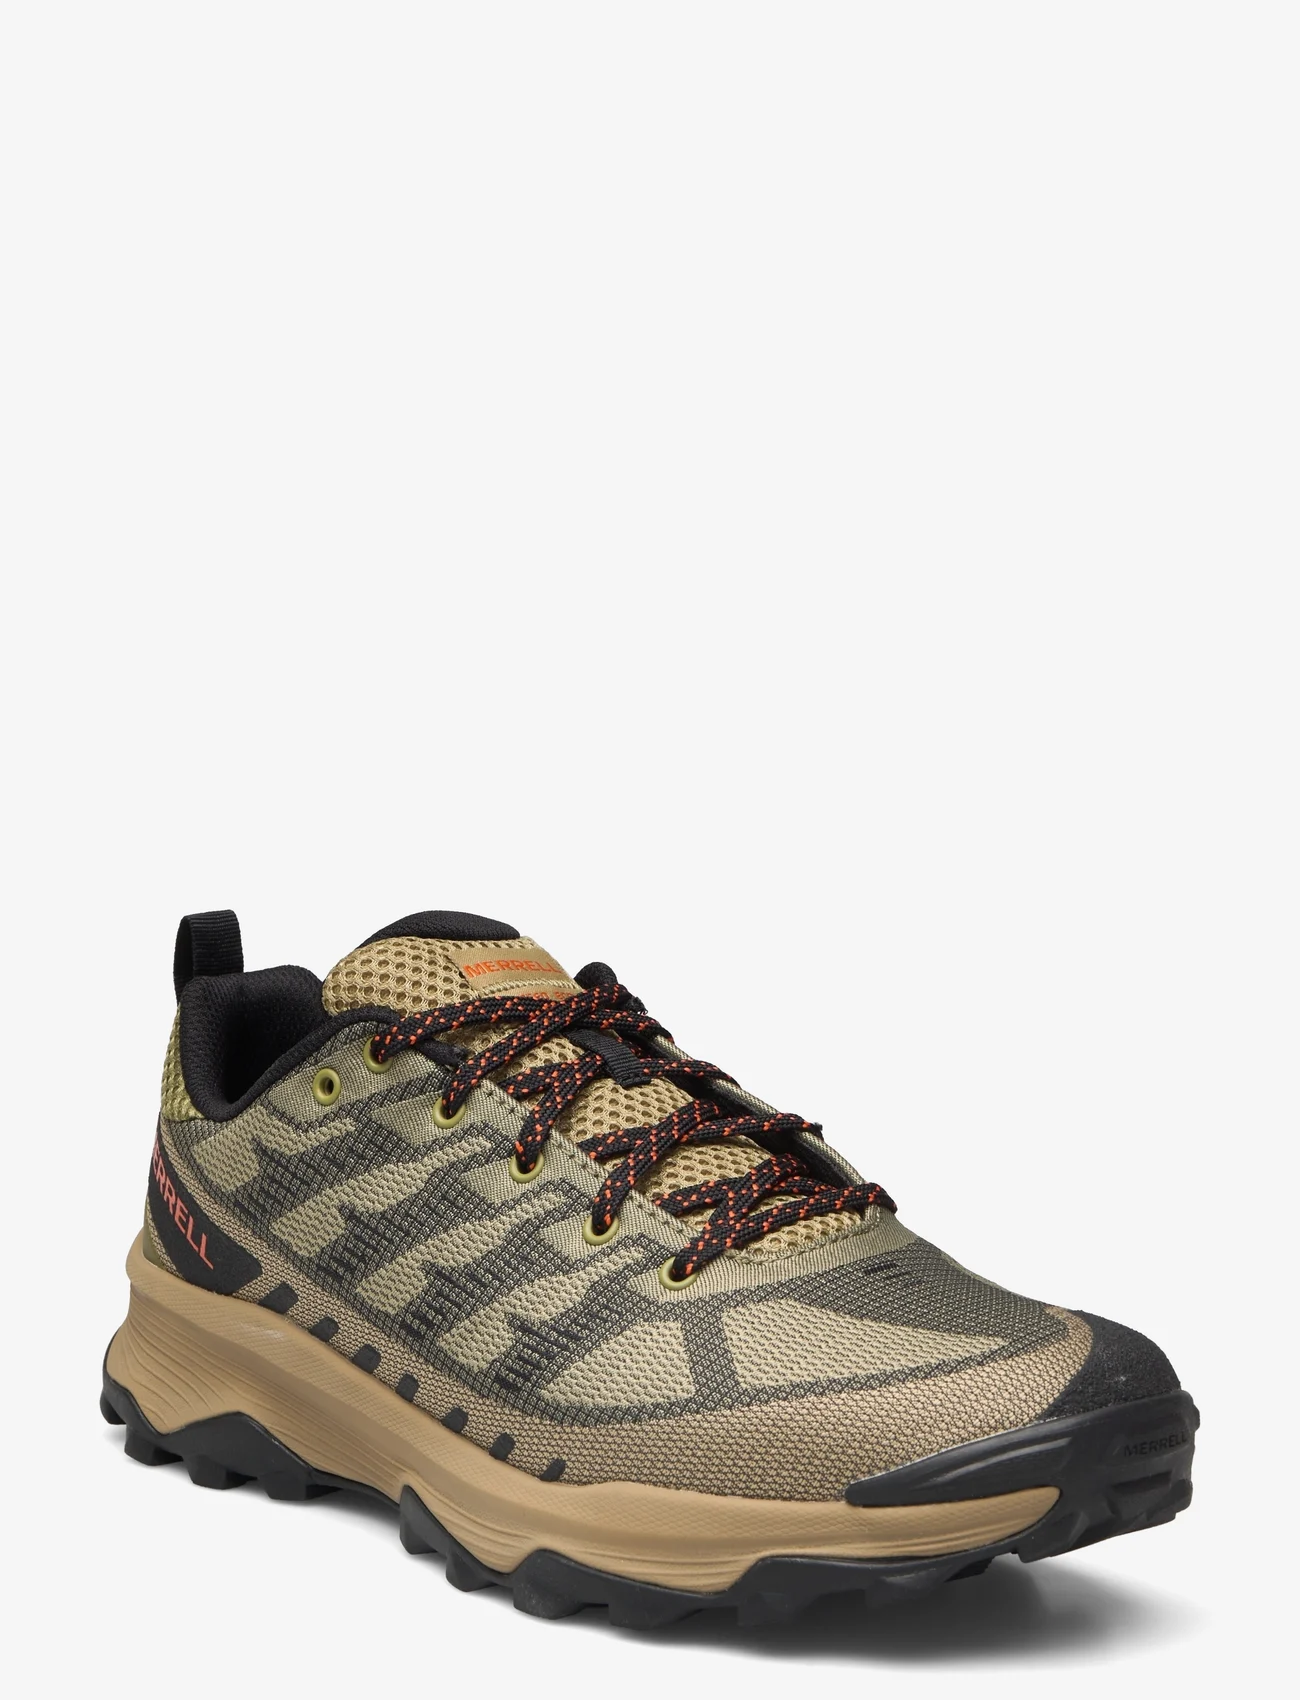 Merrell - Men's Speed Eco - Herb/Coyote - hiking shoes - herb/coyote - 0